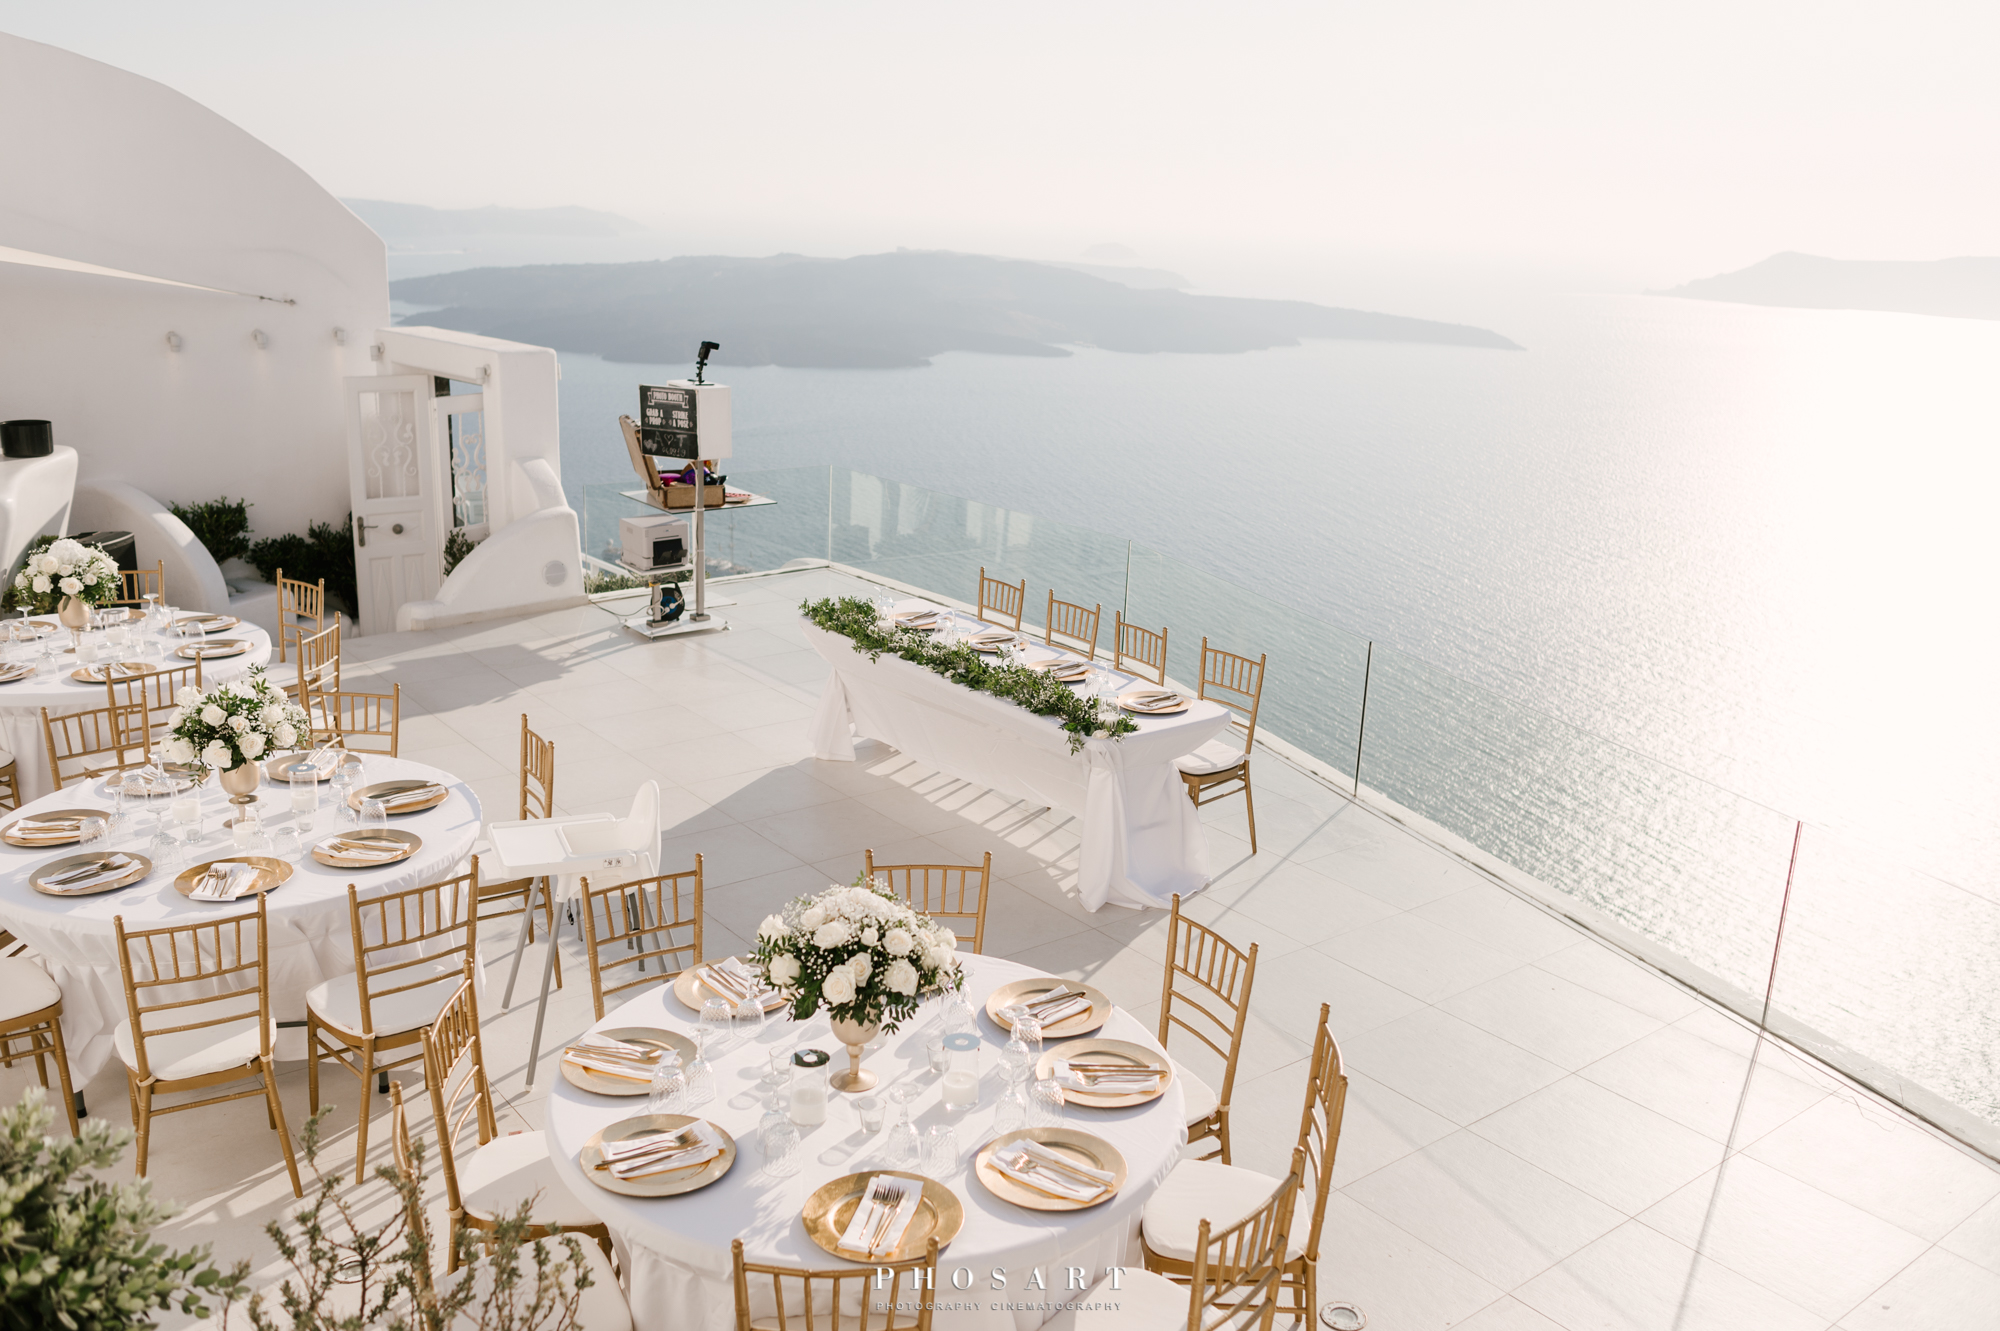 The terrace of Dana Villas decorated for a wedding event overlooking the Aegean Sea